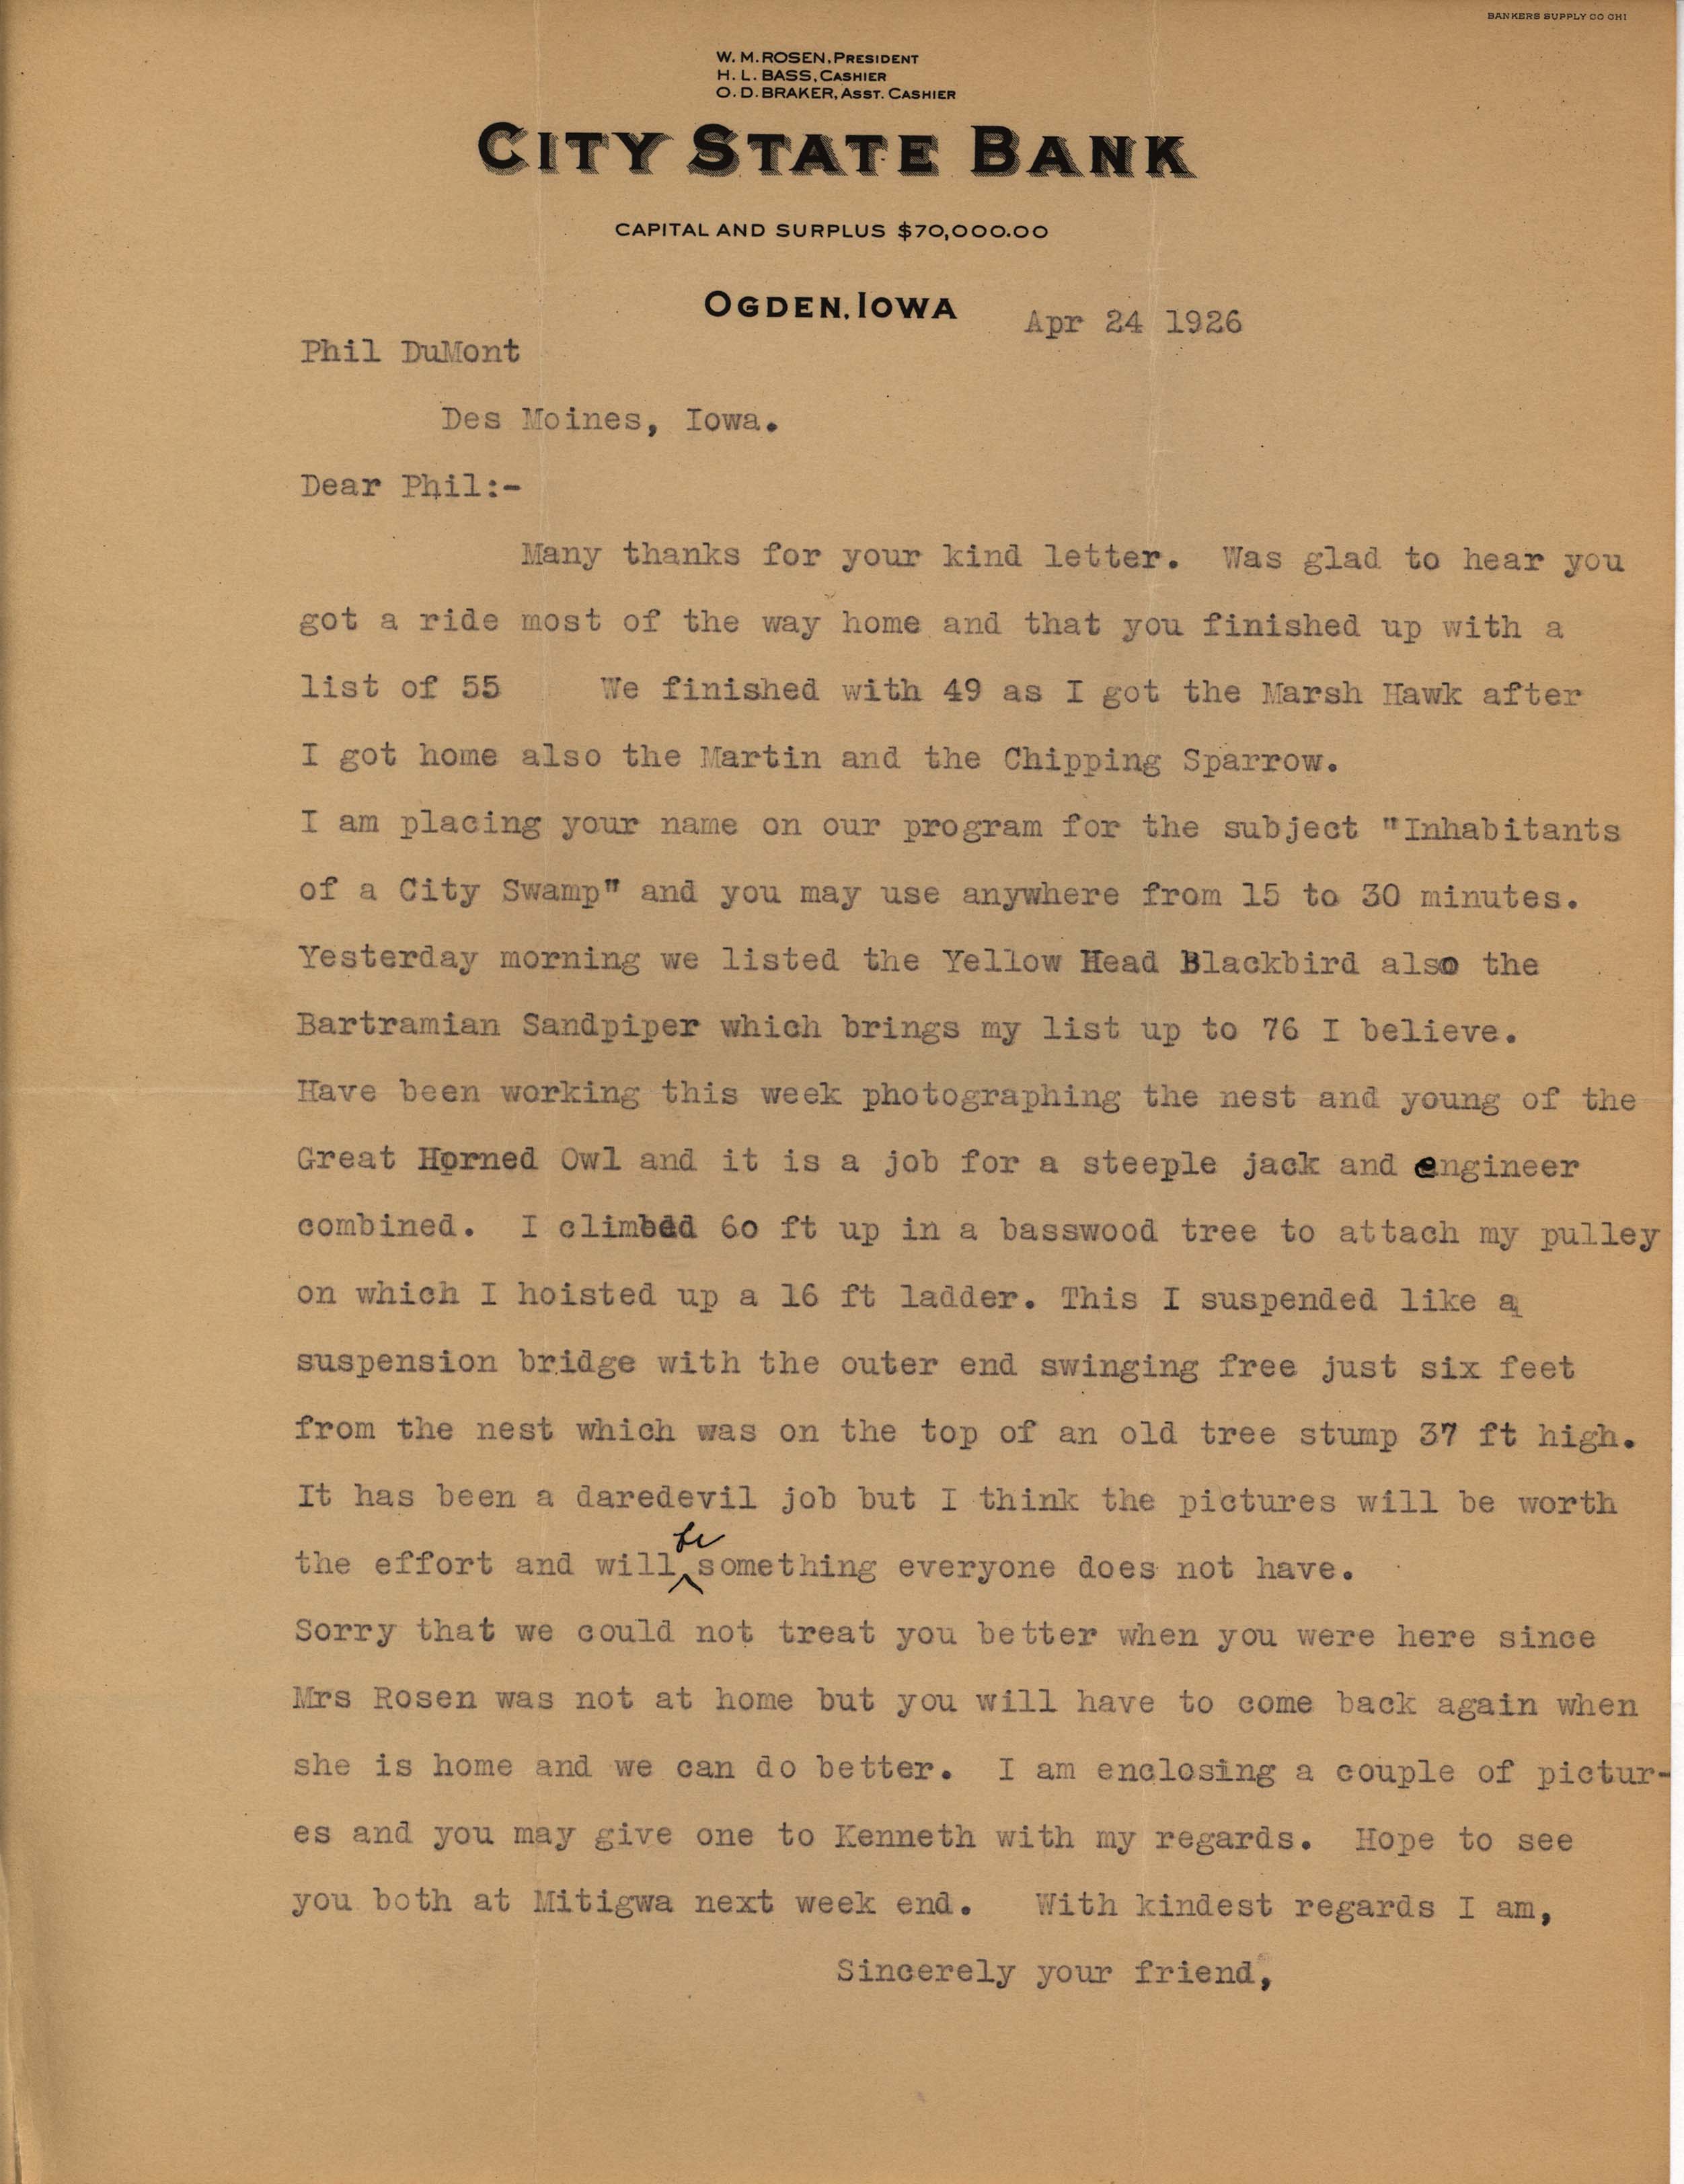 Walter Rosene letter to Philip DuMont regarding recent sightings and photographing a Great Horned Owl, April 24, 1926